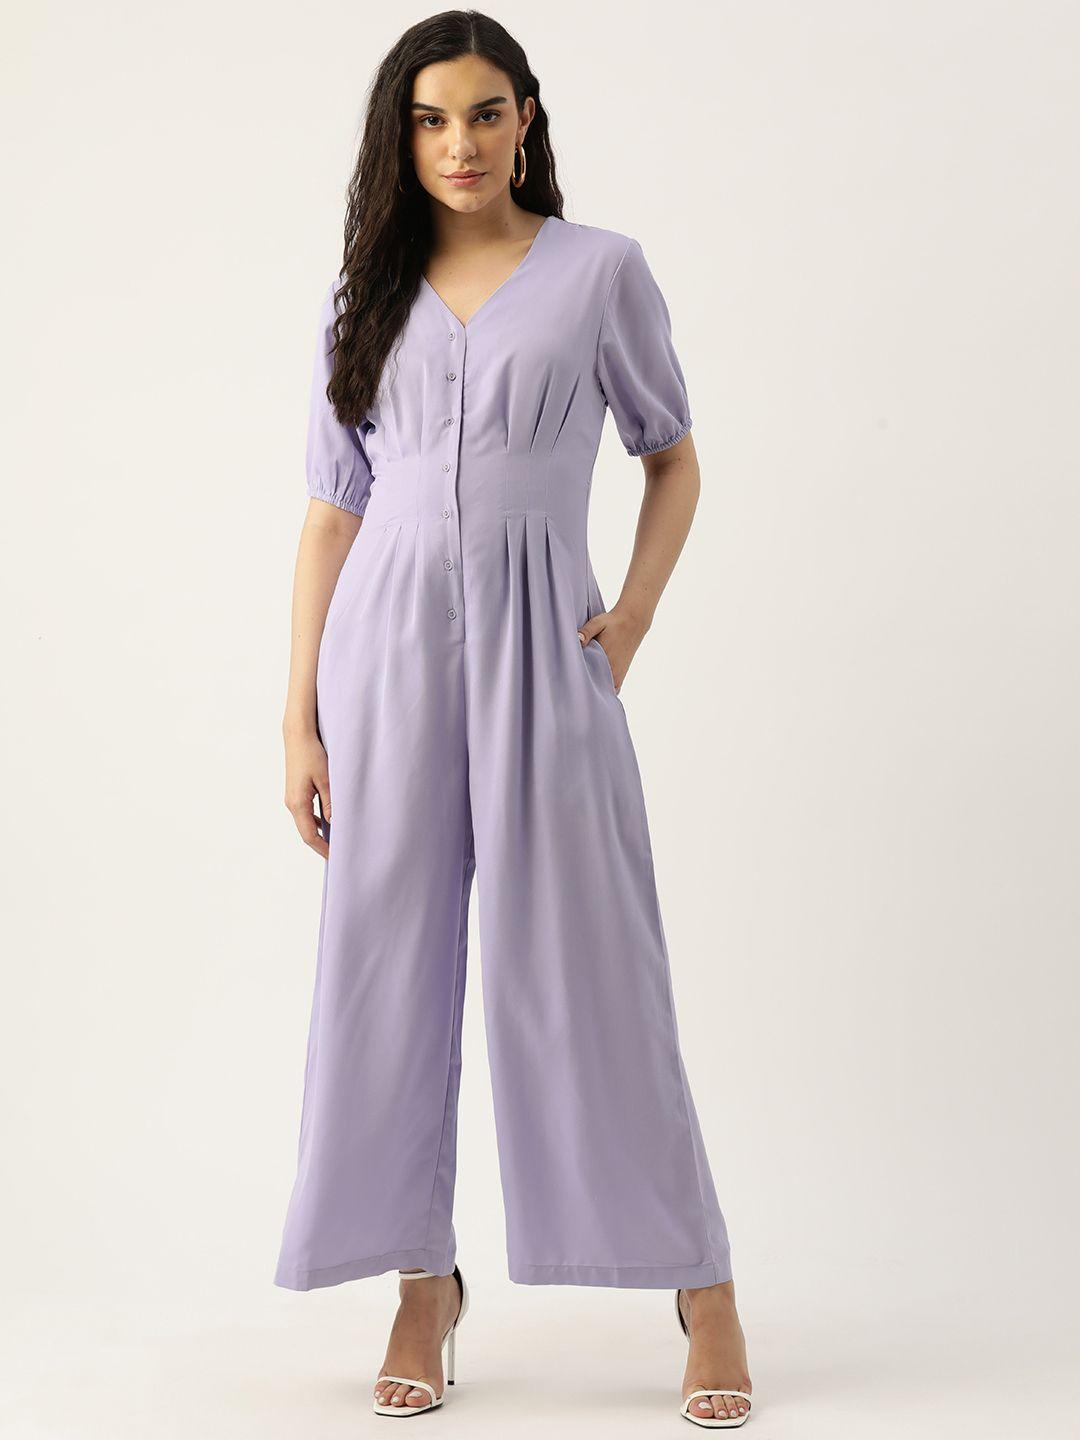 rue collection solid front open basic jumpsuit